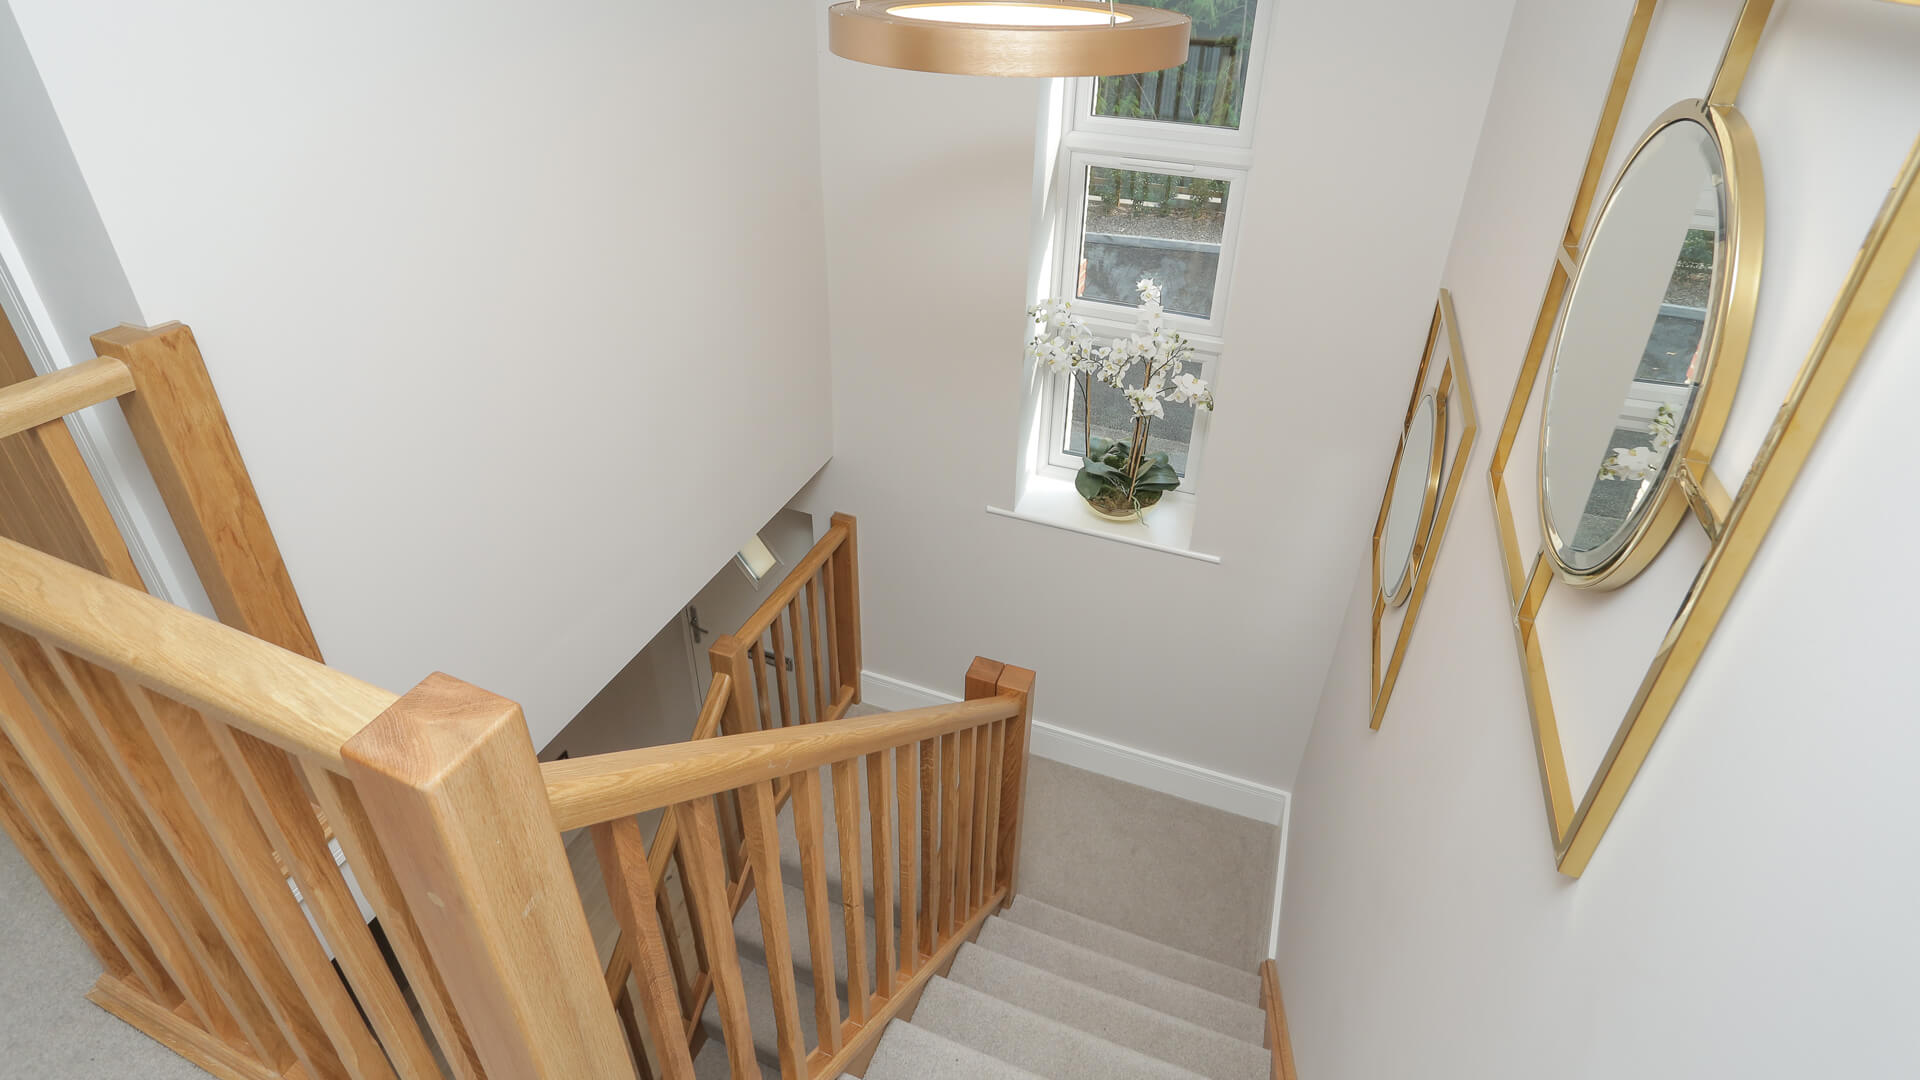 Stairwell with oak banister and beige carpet at Woodside cour.